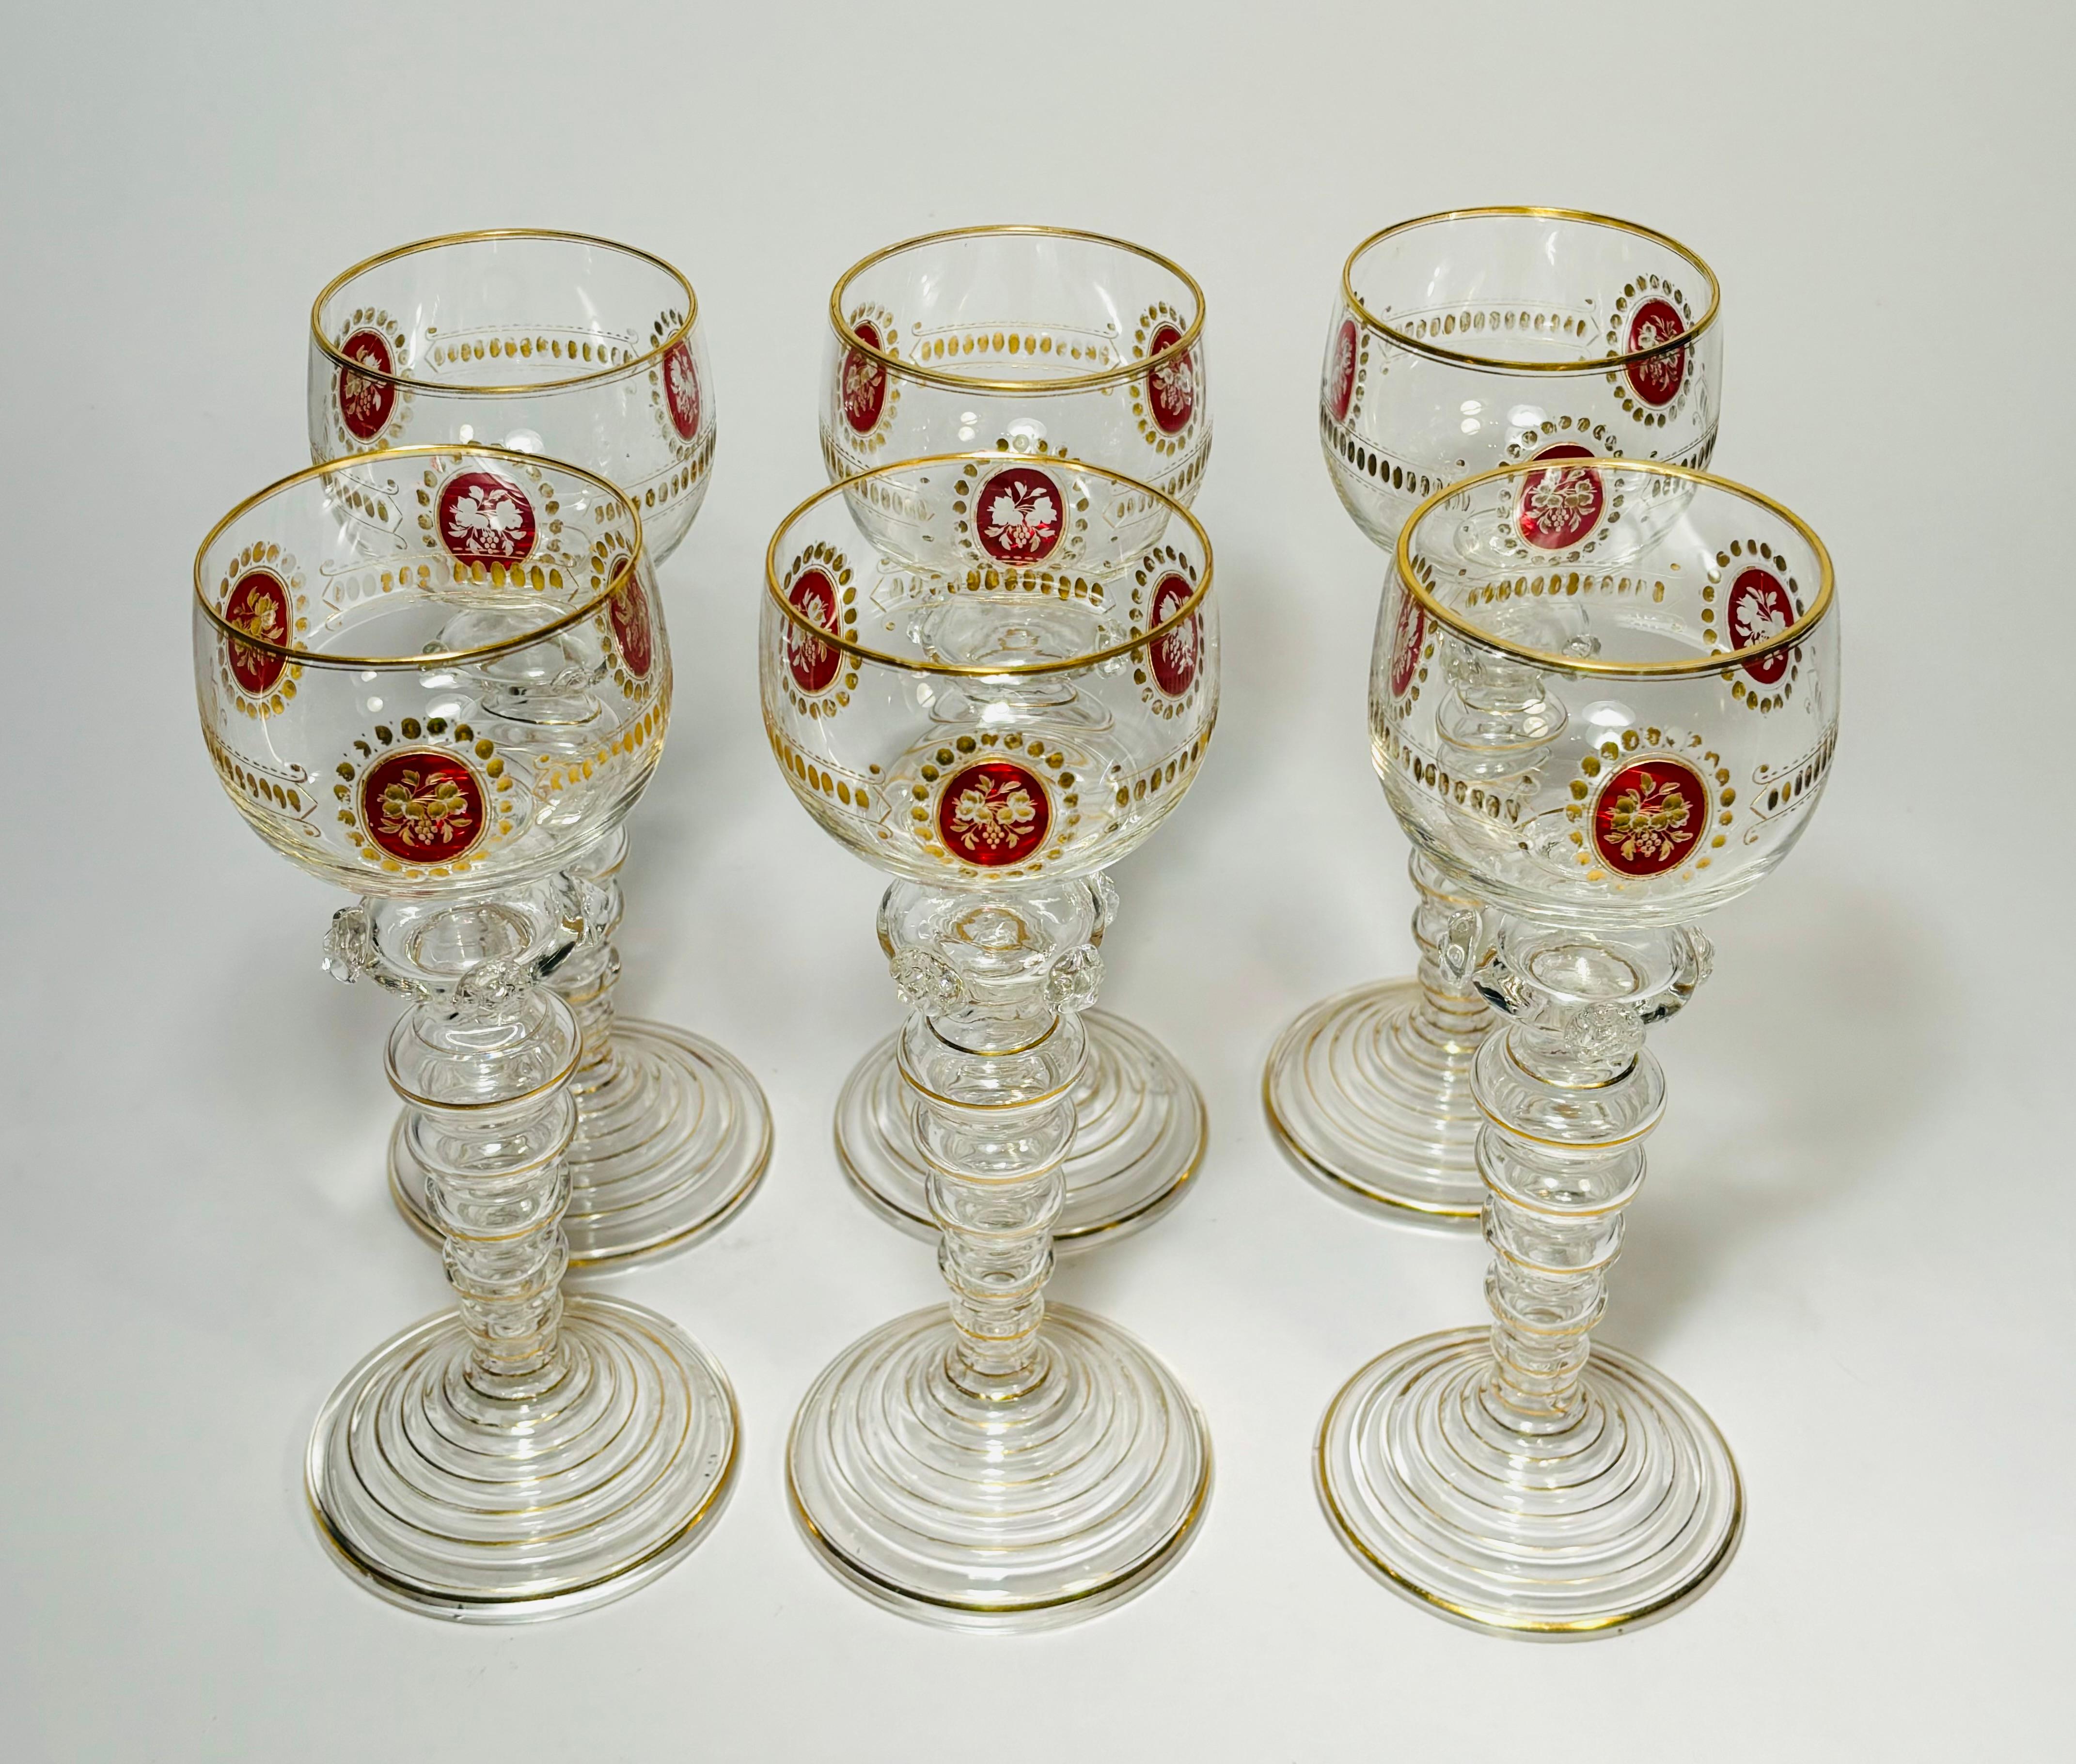 An elegant set of white wine glasses by one of our favorite Gilded Age Crystal Companies, Moser. These feature an uniquely blown shaped stem with added embellishments. The bowls have a ruby cartouche with hand cut and gilded accents. In very good